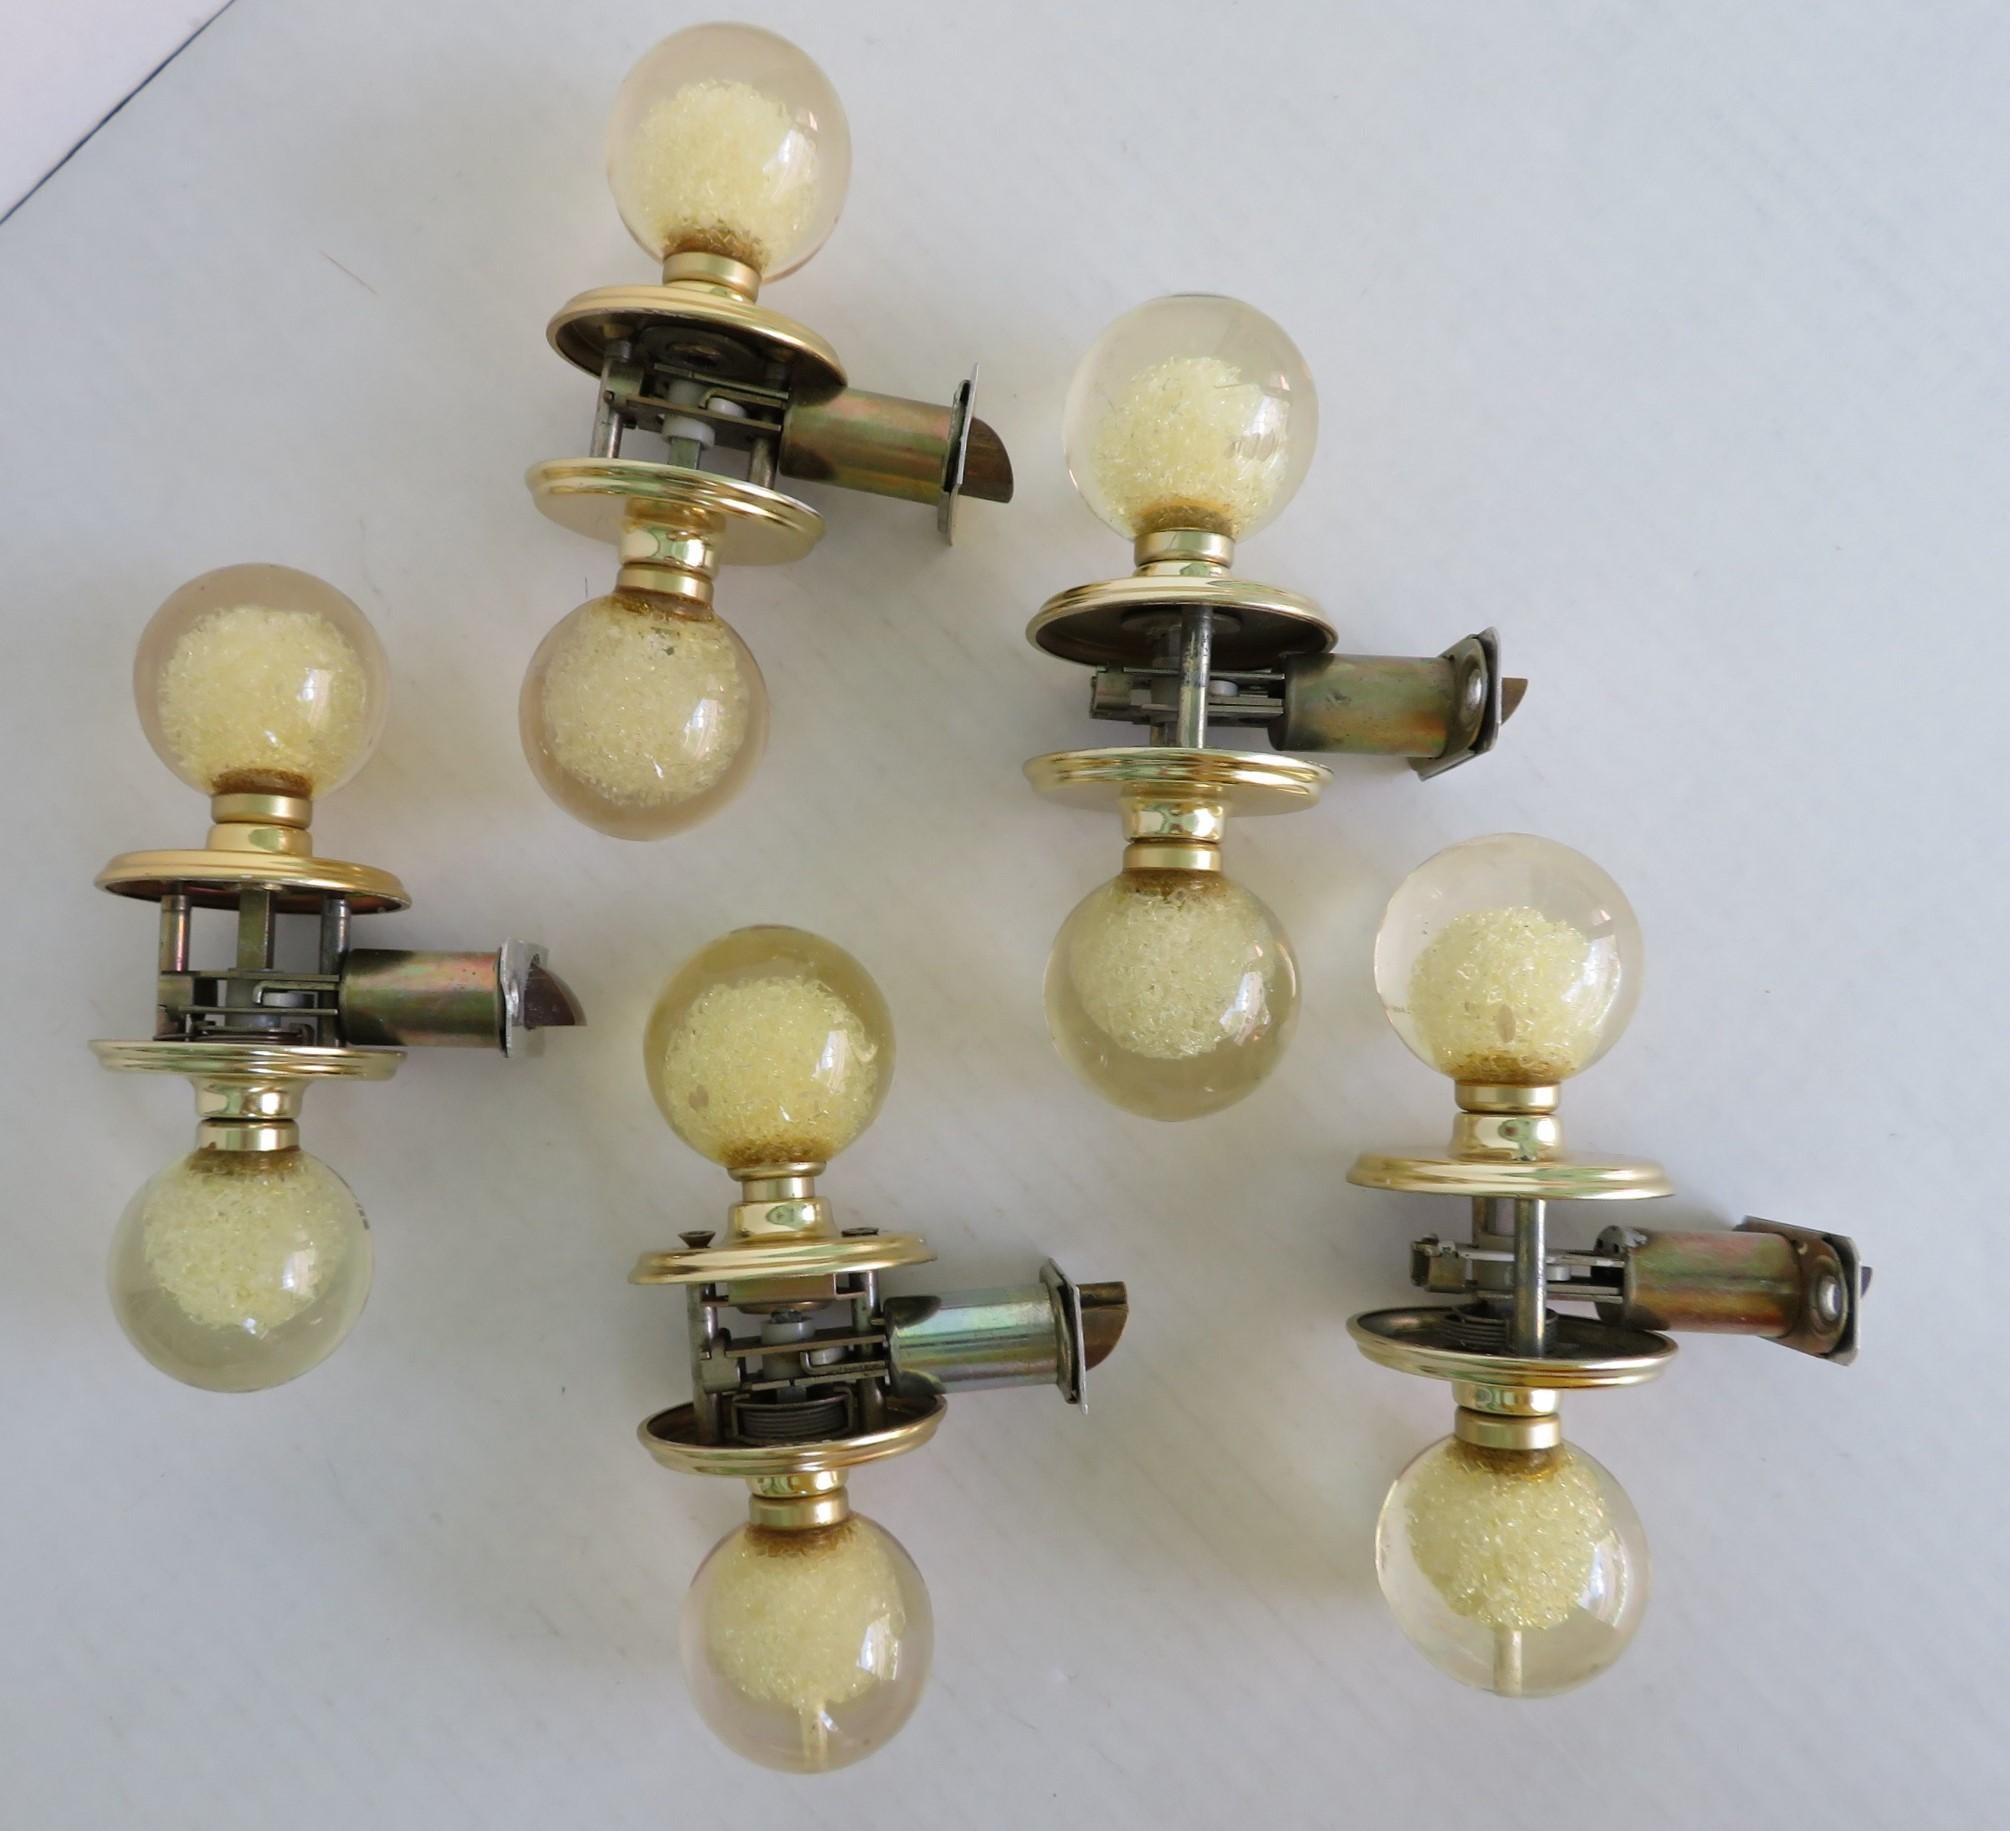 A Luxe set of five Lucite door handles knobs with bubbly inclusions by interior designer, architect and home builder Ruth Richmond of Sarasota, Florida. With dark brass mounts, the slightly amber Lucite balls have interior explosions of bubbles